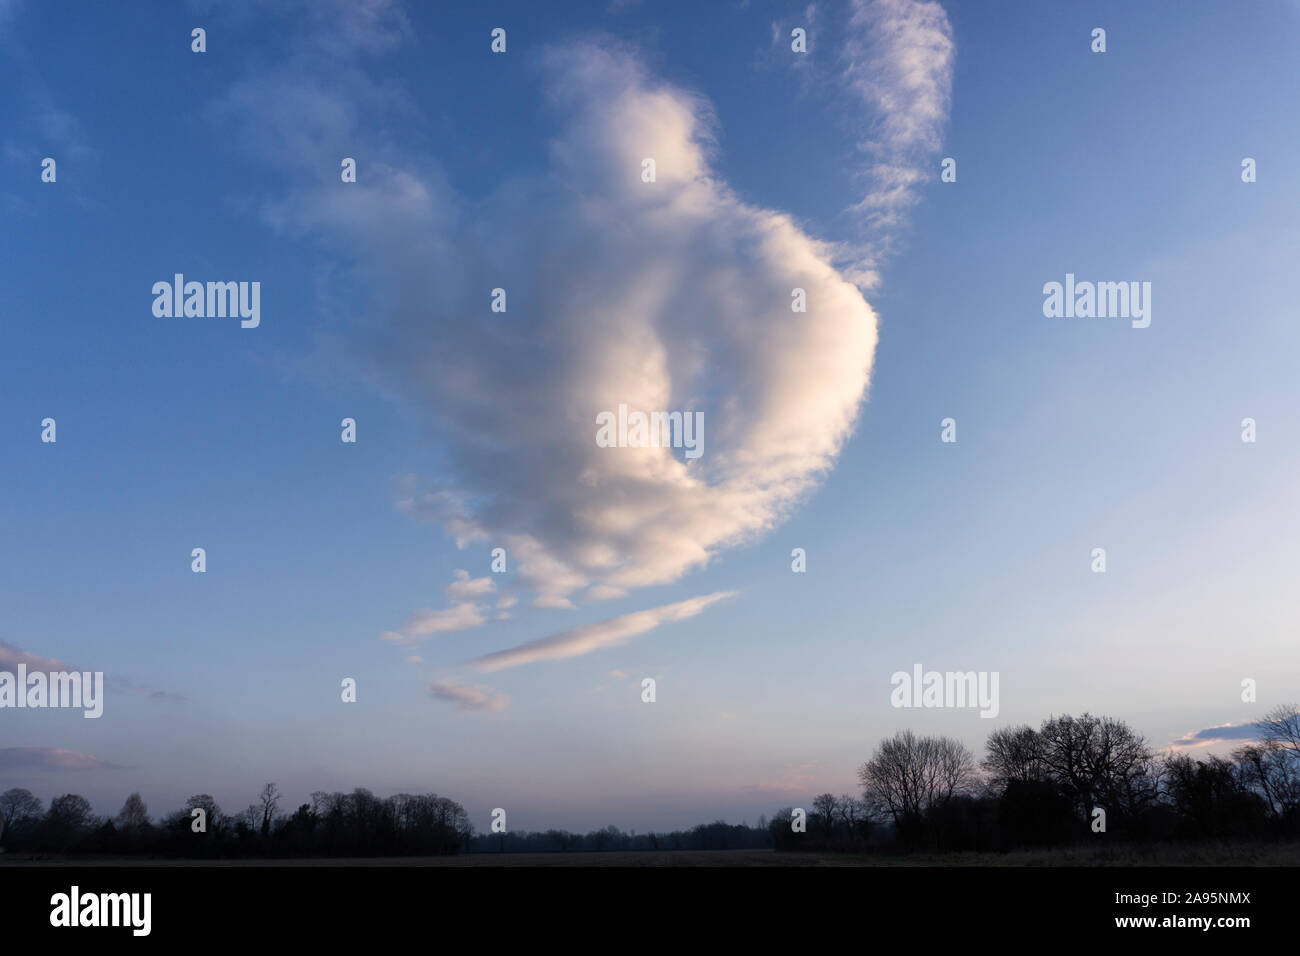 Cloud formation in the shape of a (fat) giant, genie or angel flying over fields at dusk Stock Photo